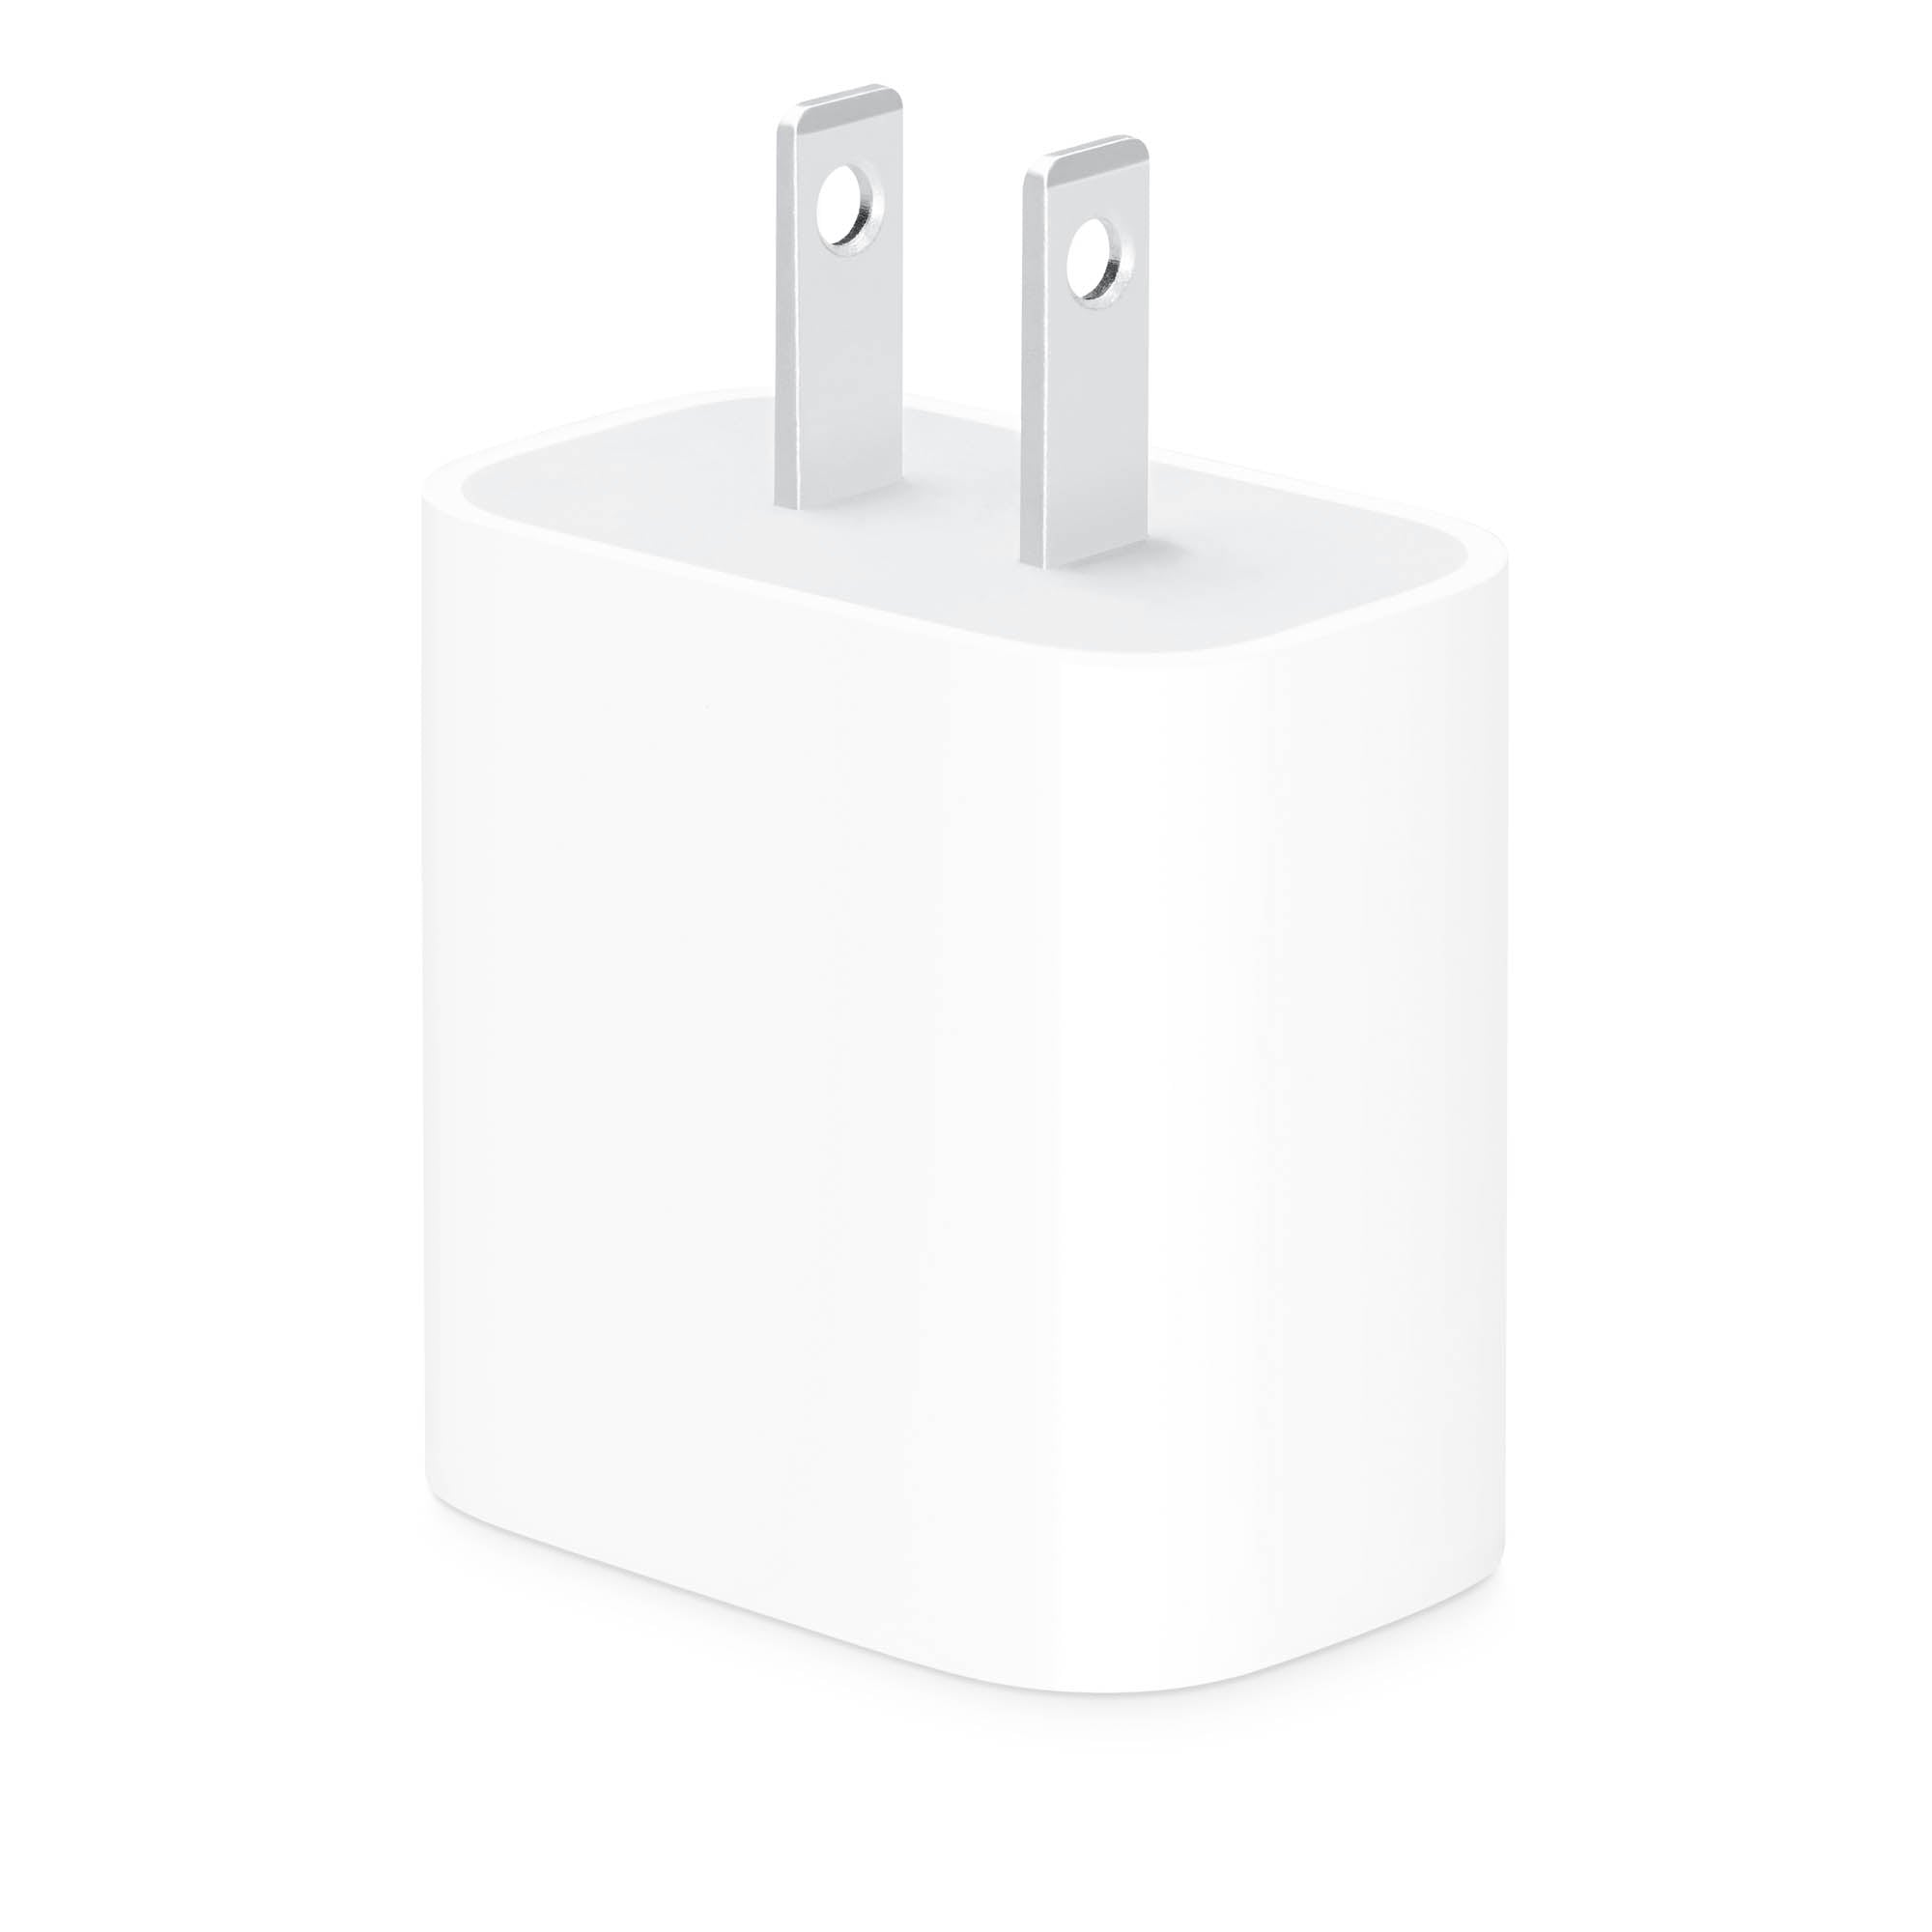 Magsafe Charger + 20W USB-C Power Adapter